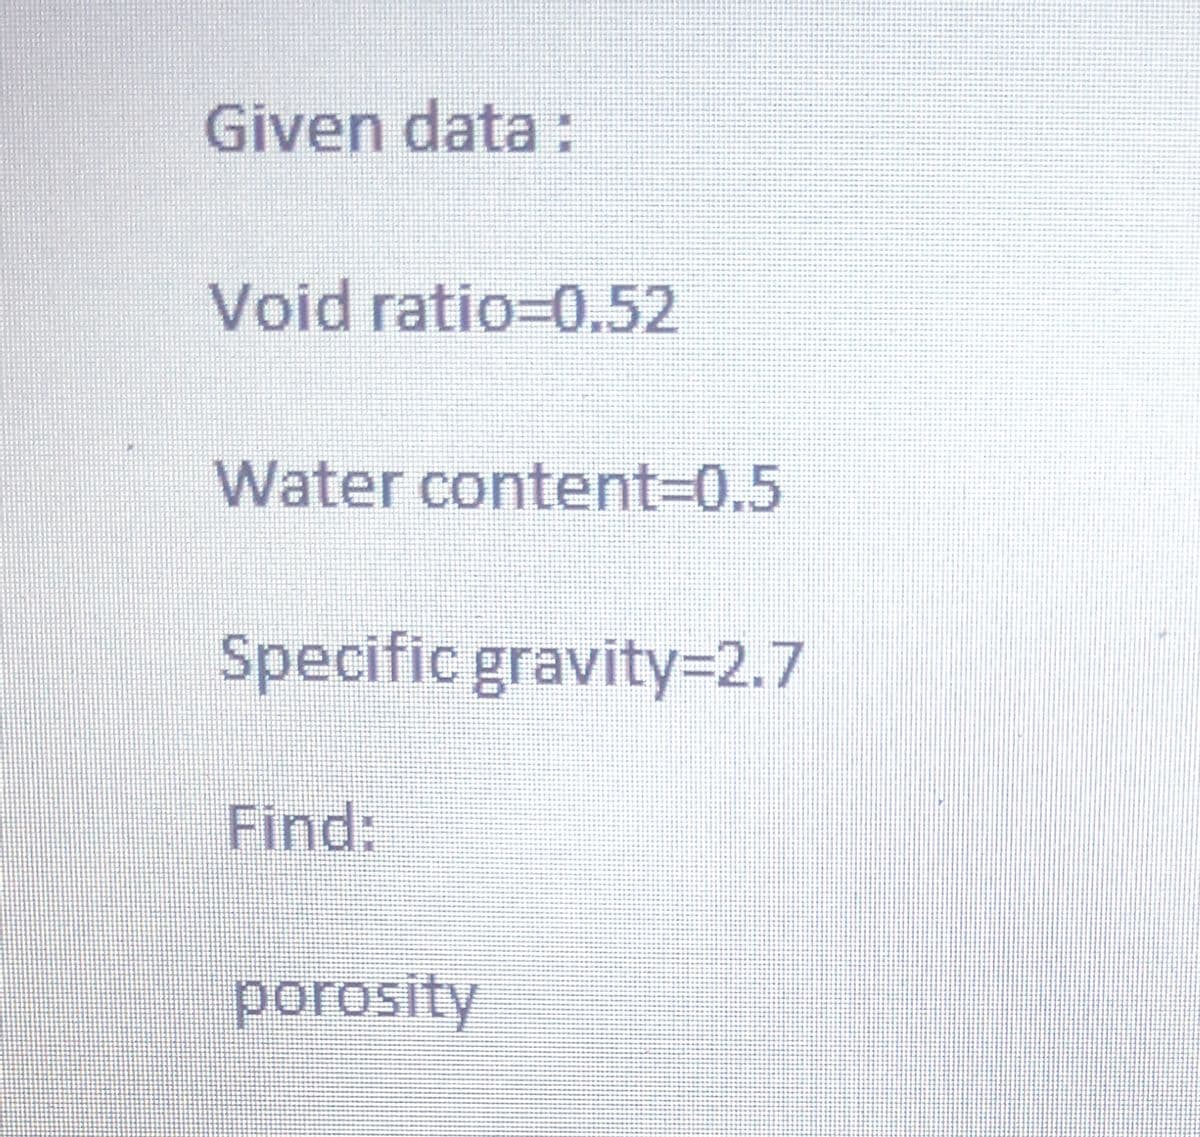 Given data:
Void ratio=0.52
Water content=0.5
Specific gravity=2.7
Find:
porosity